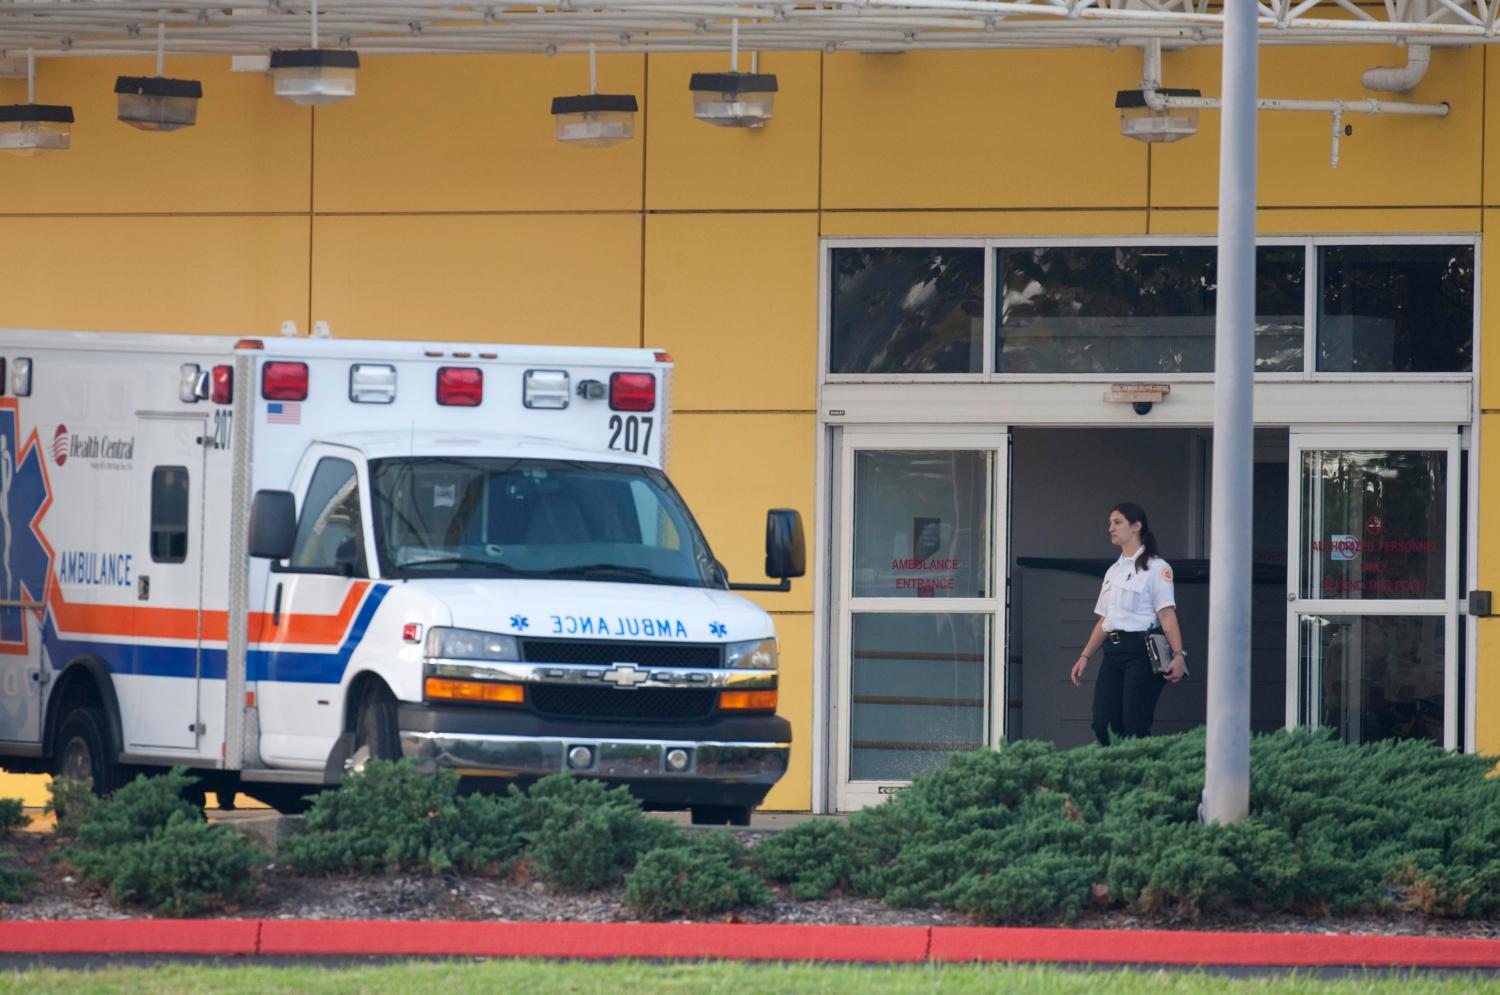 An ambulance sits outside the emergency room of Health Central Hospital in Occoee, Florida where an unidentified woman was brought from the home of PGA golfer Tiger Woods during the early morning hours December 8, 2009. REUTERS/Scott Audette  (UNITED STATES HEALTH SPORT GOLF IMAGES OF THE DAY) - GM1E5C81RL301